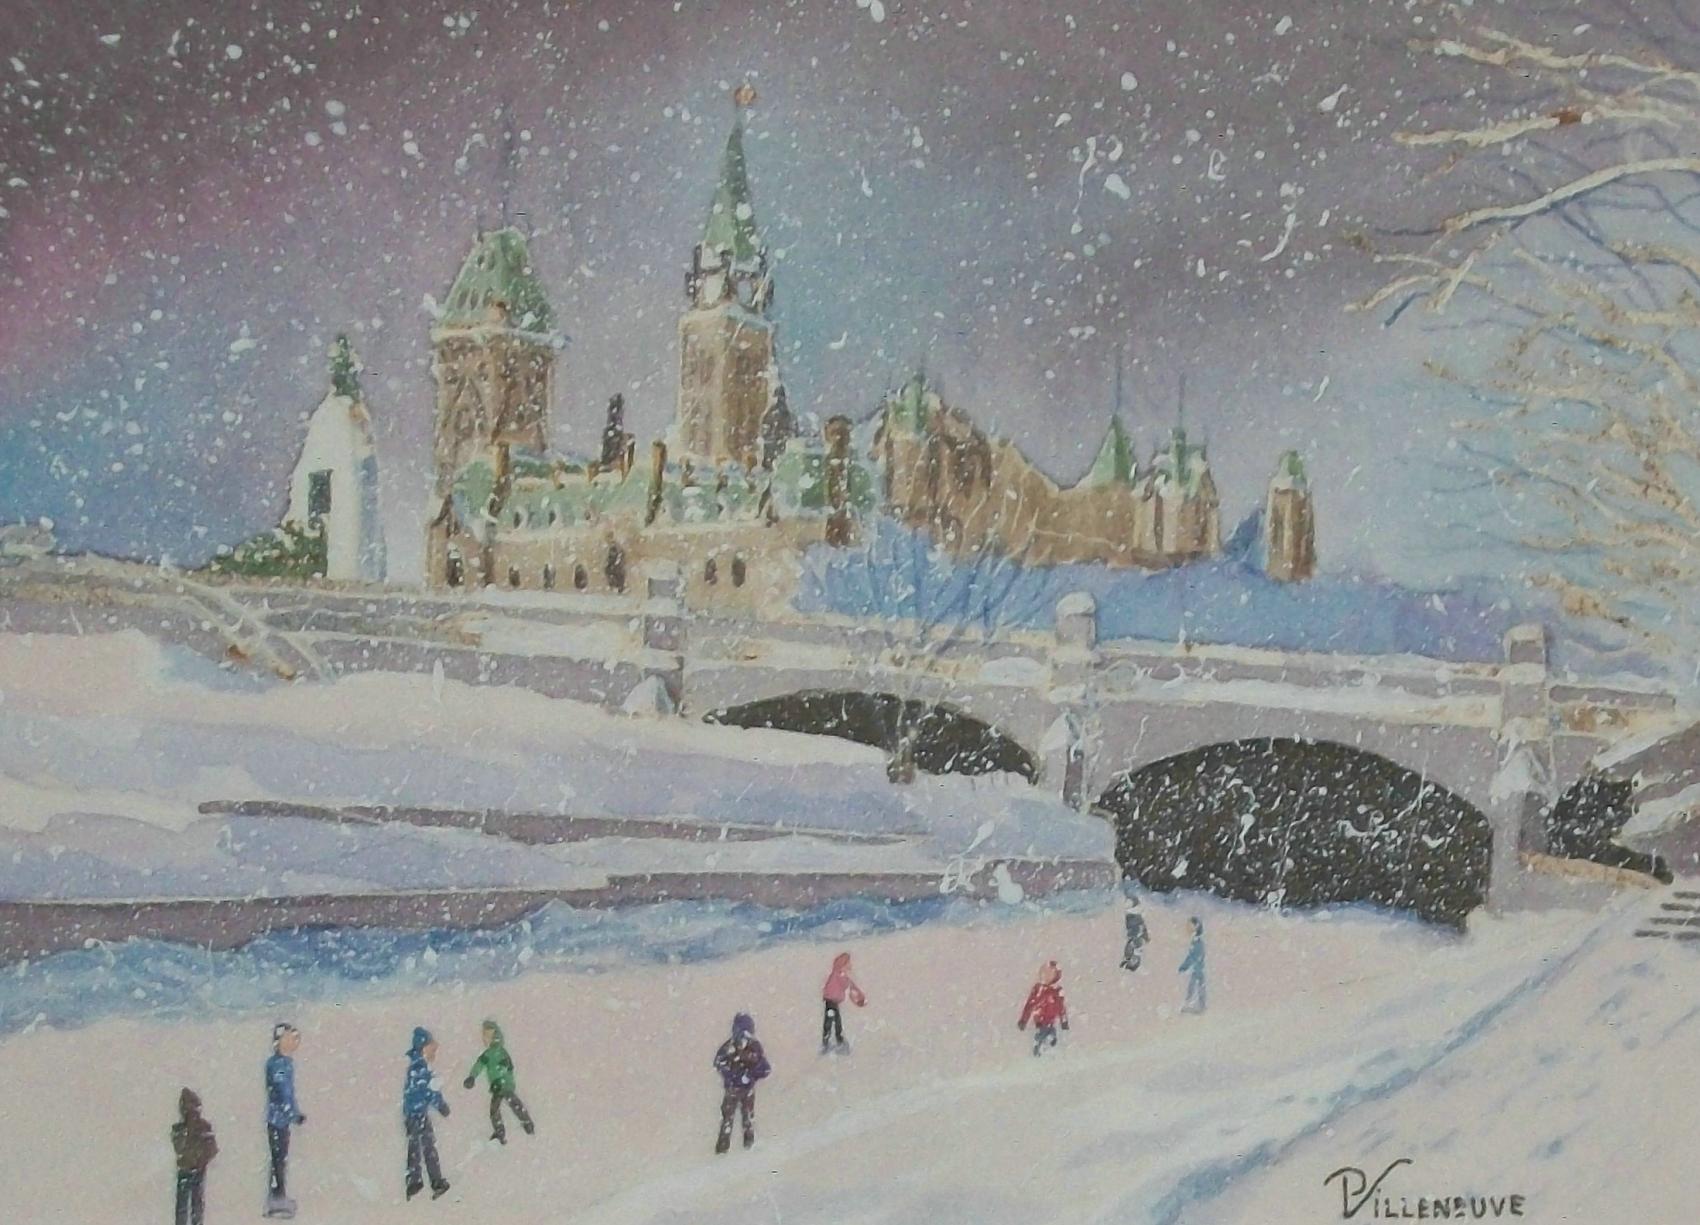 PIERRETTE VILLENEUVE (b.1944 - Aboriginal Metis Huron Wendat) - 'Les Patineurs - Canal Rideau' (The Ice Skaters - Rideau Canal) - Vintage watercolor painting on paper - original metal frame with double matte boards and glass - titled verso - signed